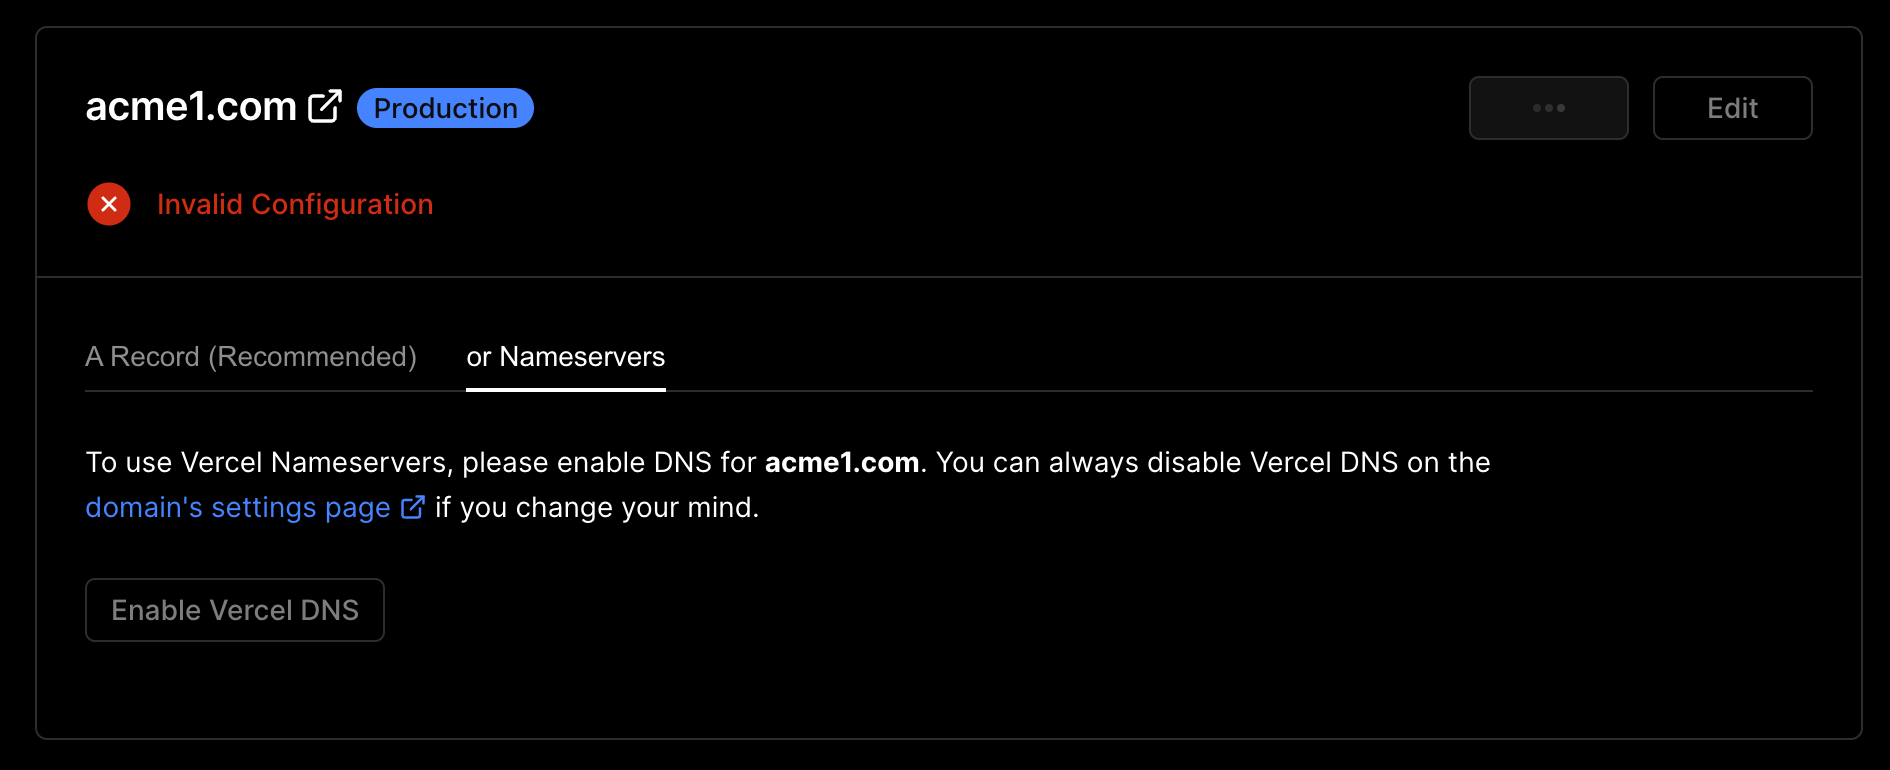 Instructions on opting in to use Vercel Nameservers.